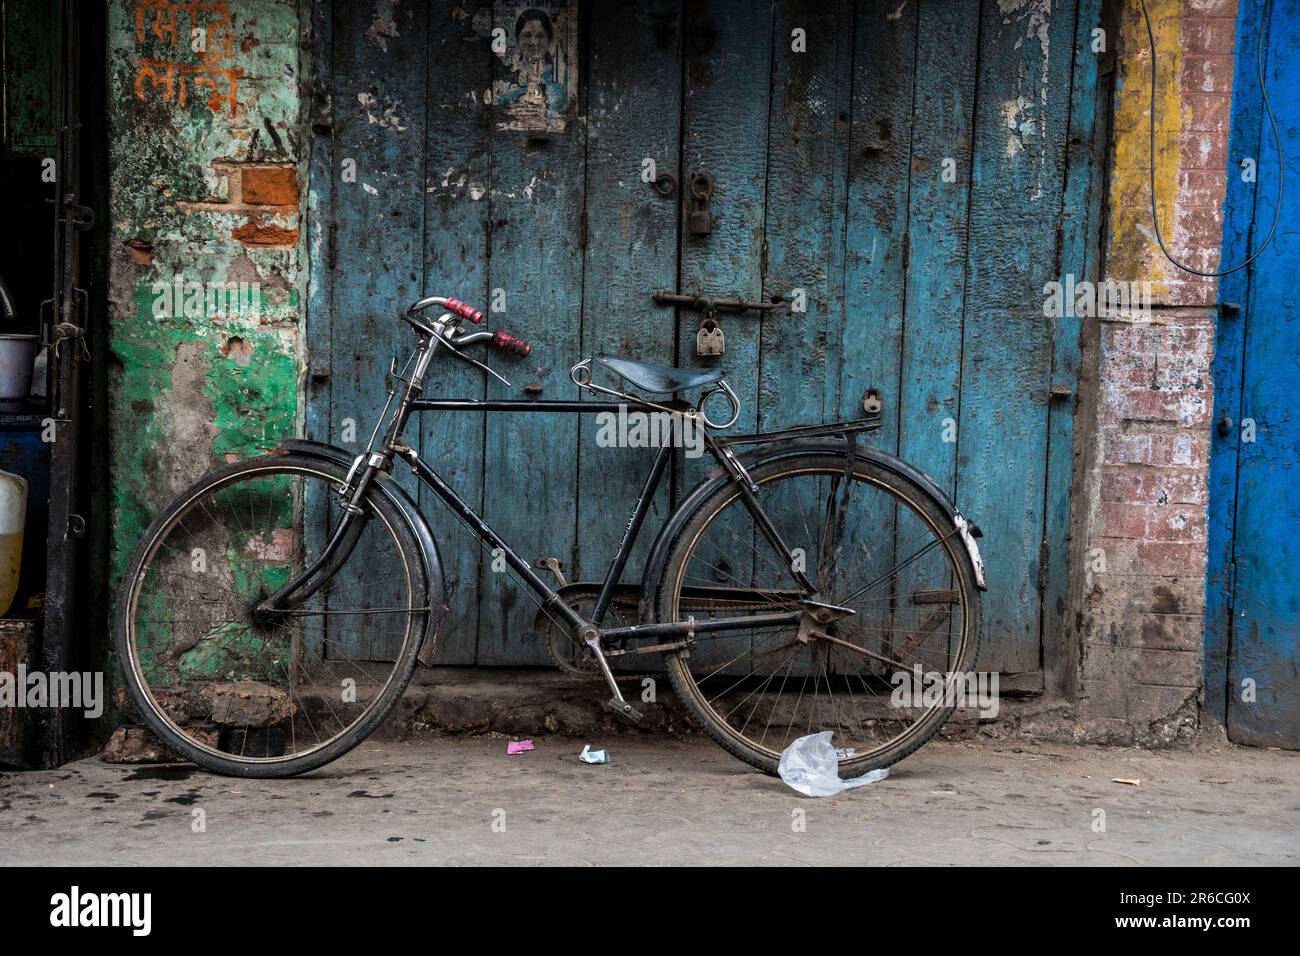 A view of the traditional Indian one speed bike, India Stock Photo